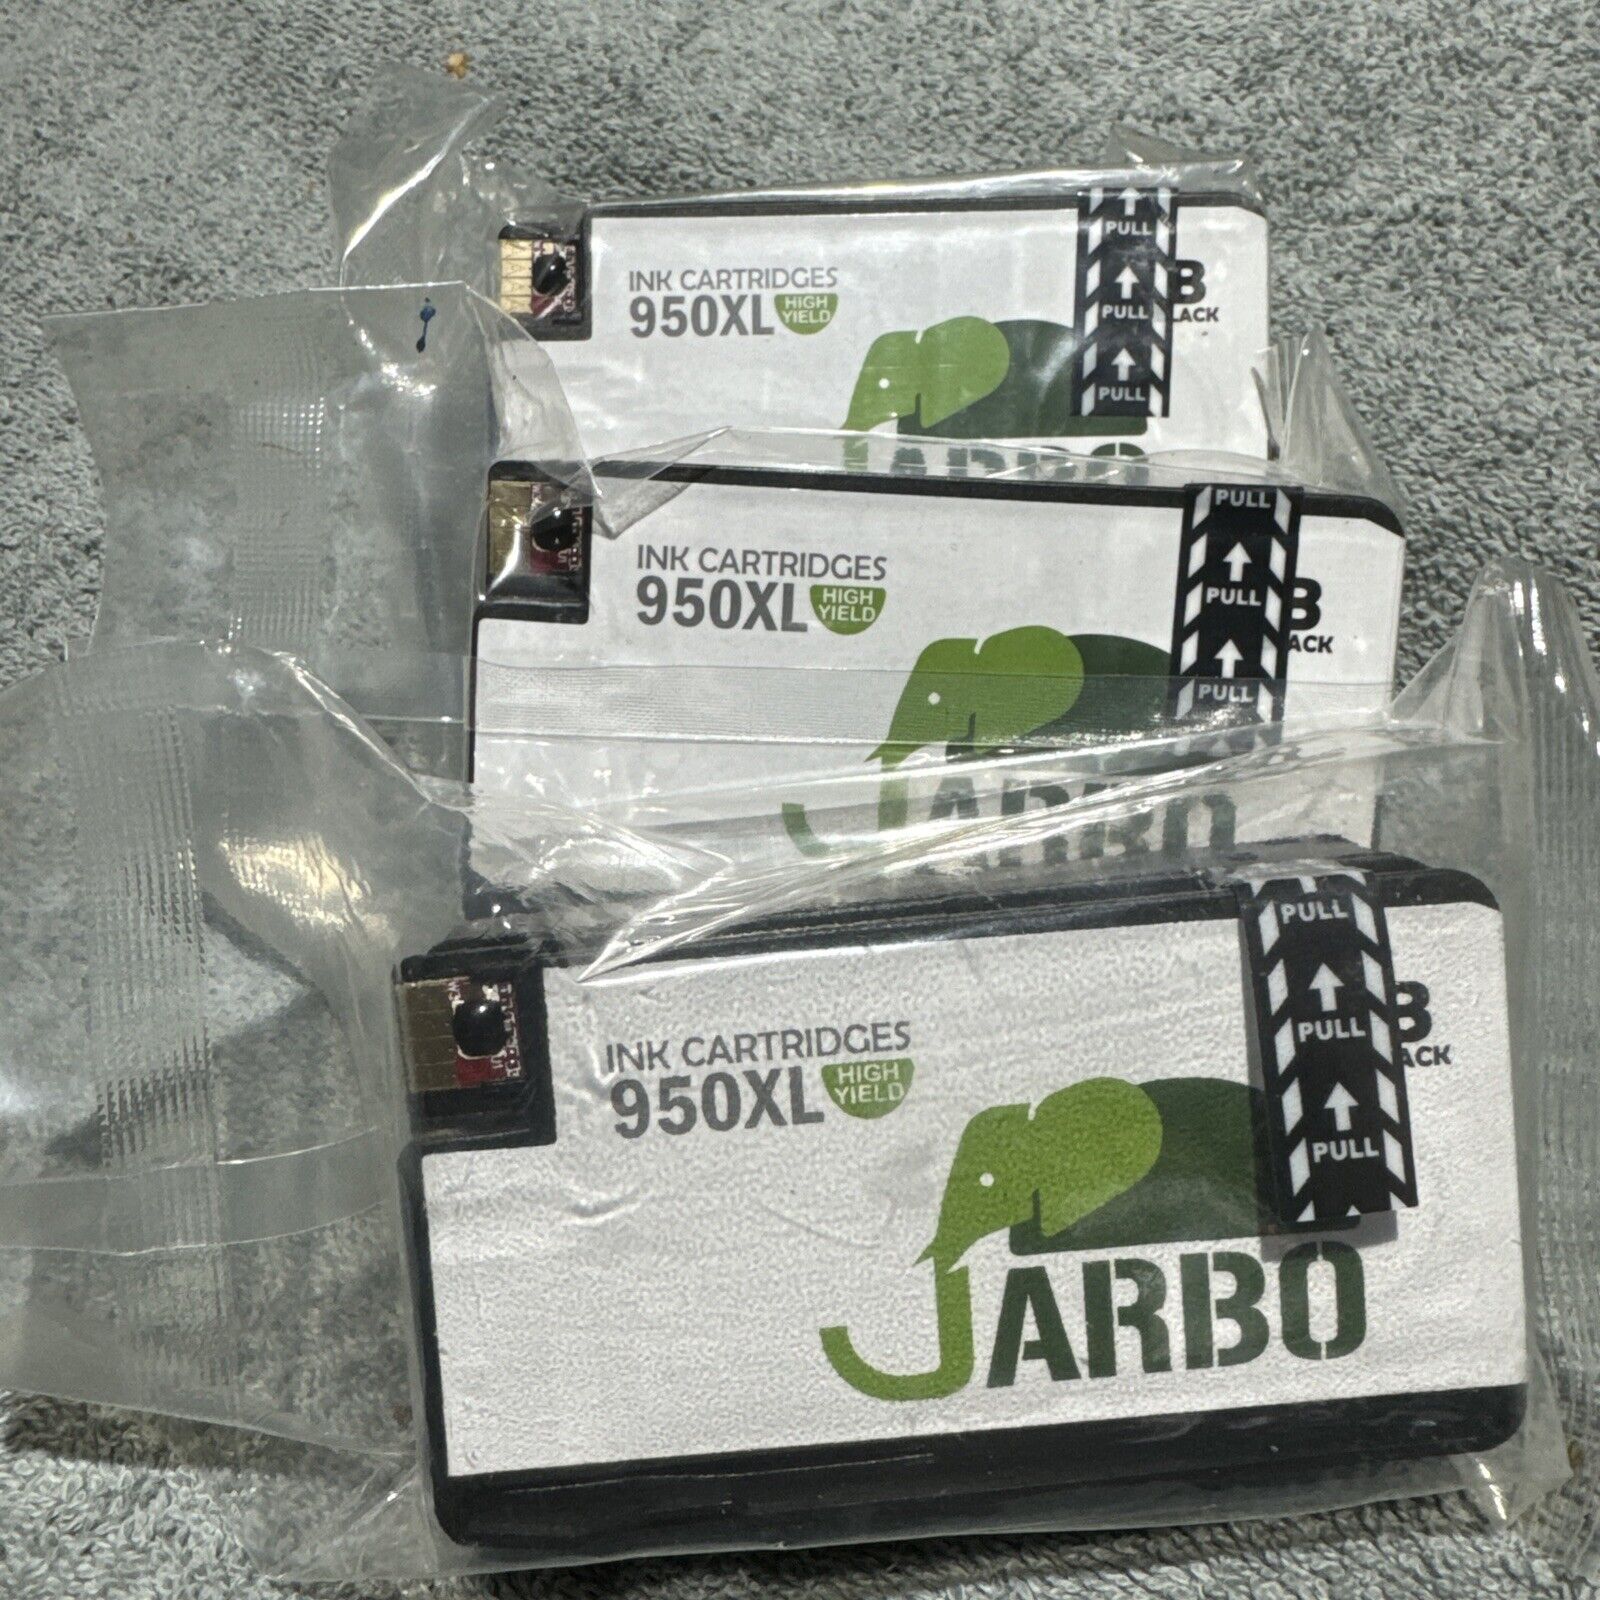 4 Jarbo 950XL Black Ink Cartridges compatible replacement for HP 950XL